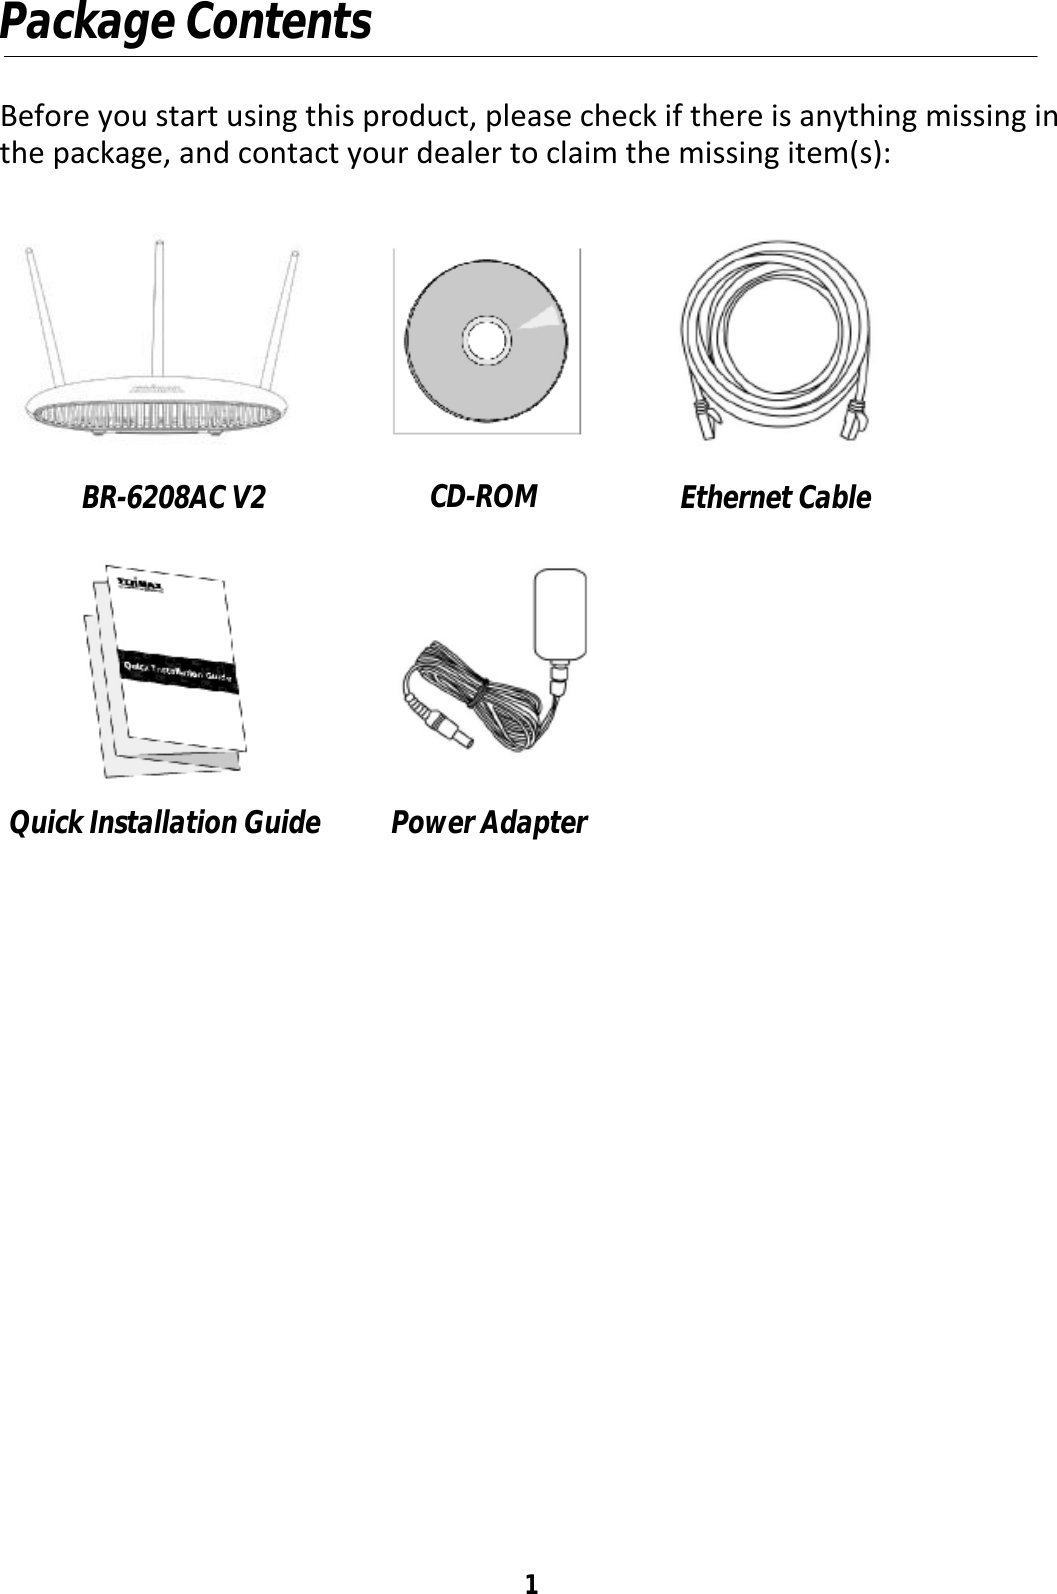 1 Package Contents  Before you start using this product, please check if there is anything missing in the package, and contact your dealer to claim the missing item(s):                            Ethernet Cable  Quick Installation Guide  Power Adapter  CD-ROM  BR-6208AC V2  